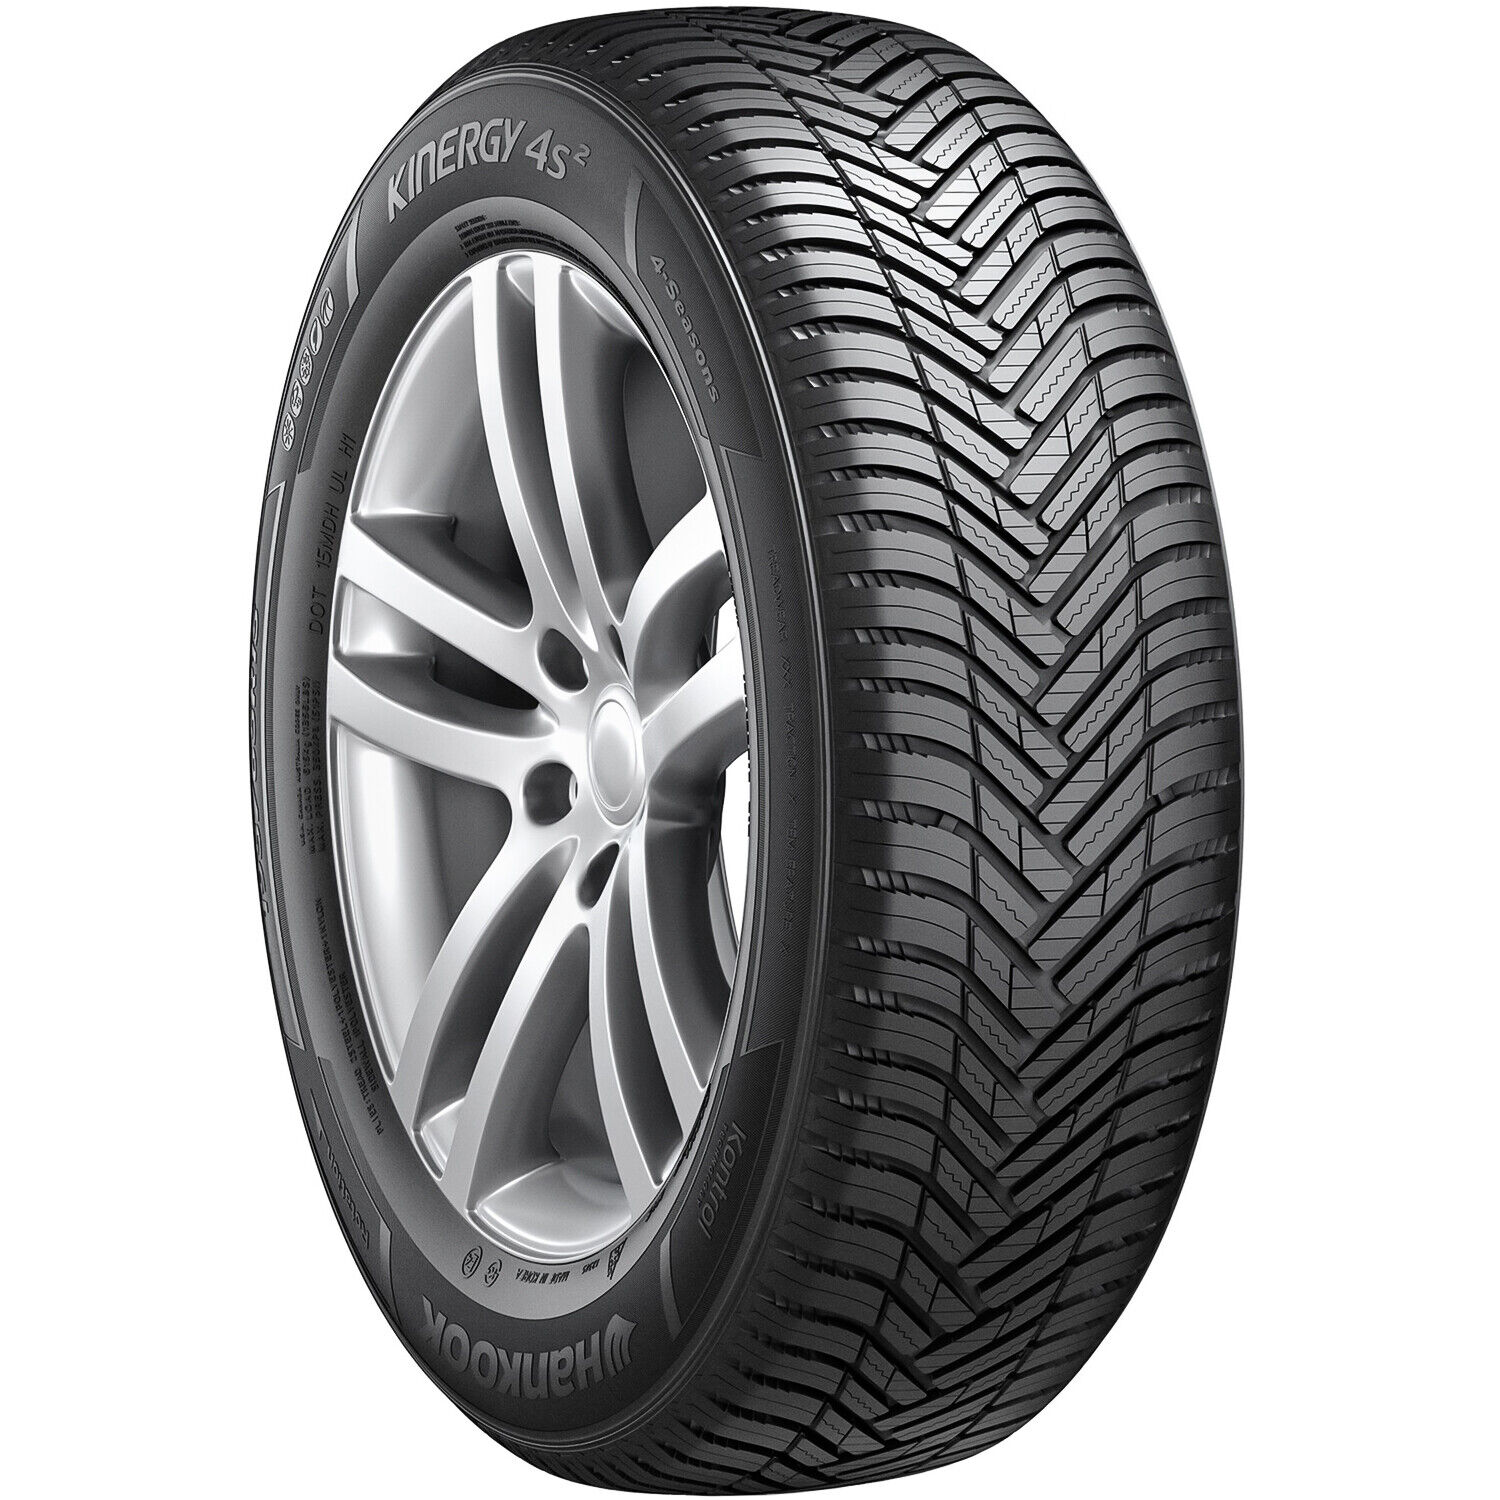 2 Tires Hankook Kinergy 4S2 225/60R16 98H All Weather